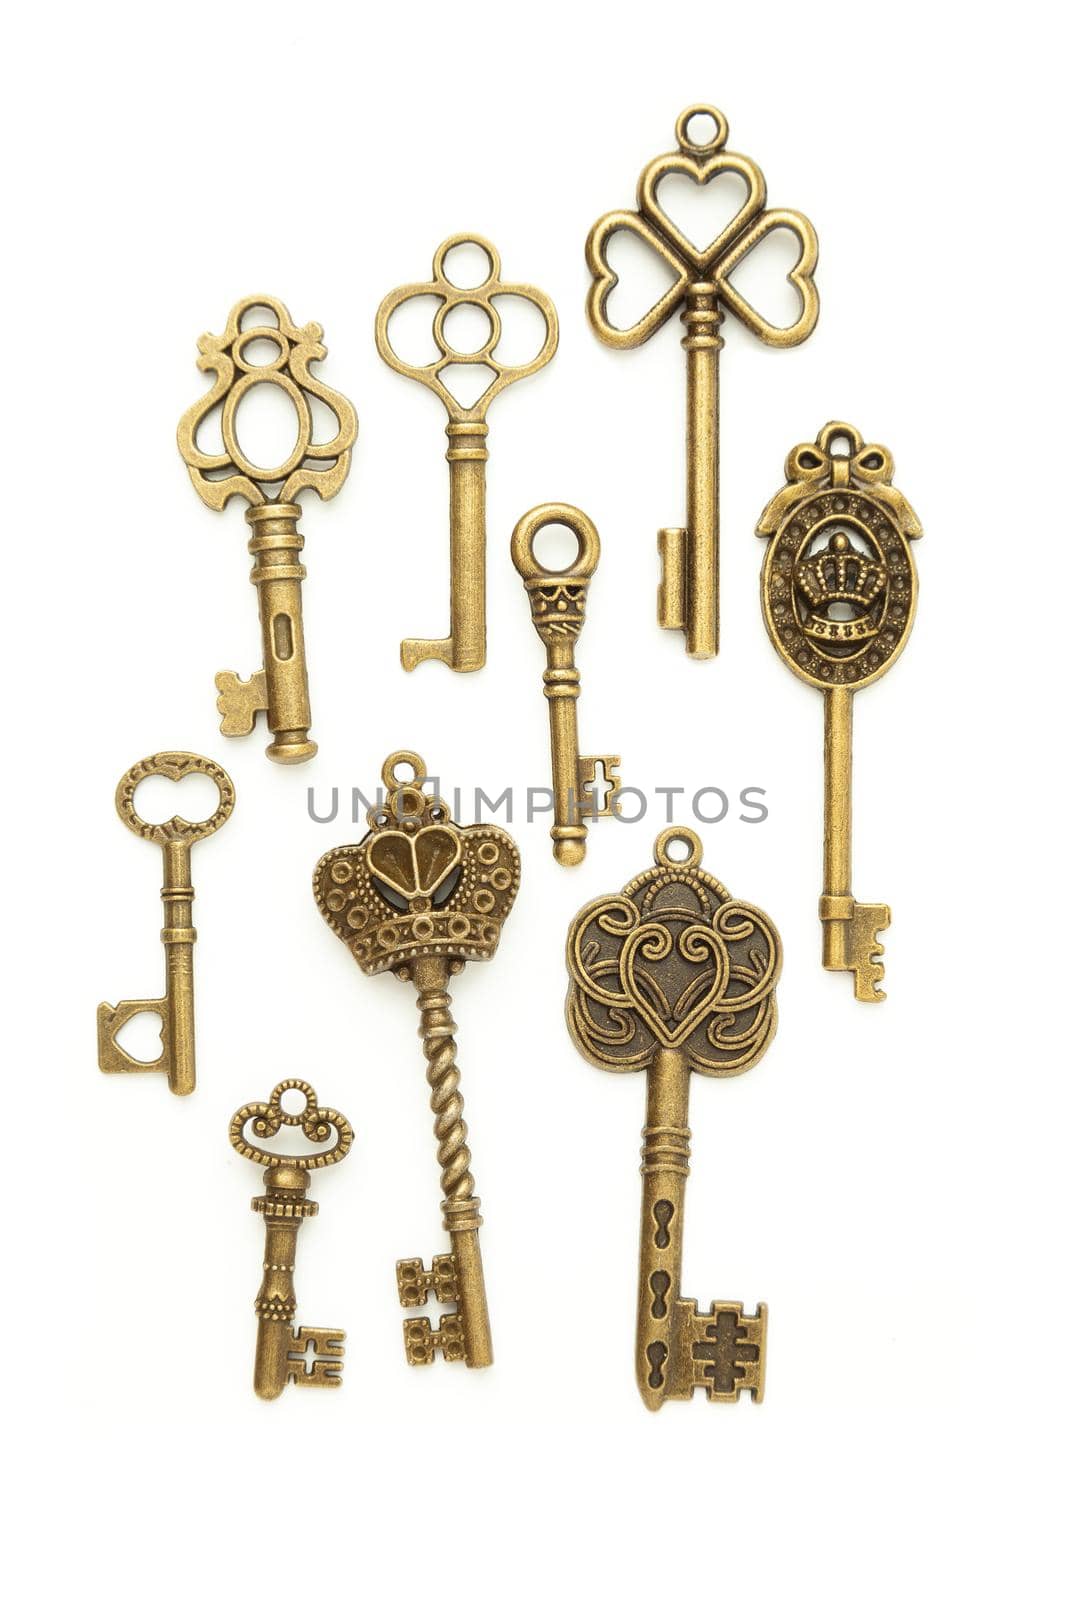 Vintage Keys Collection Isolated On White Background